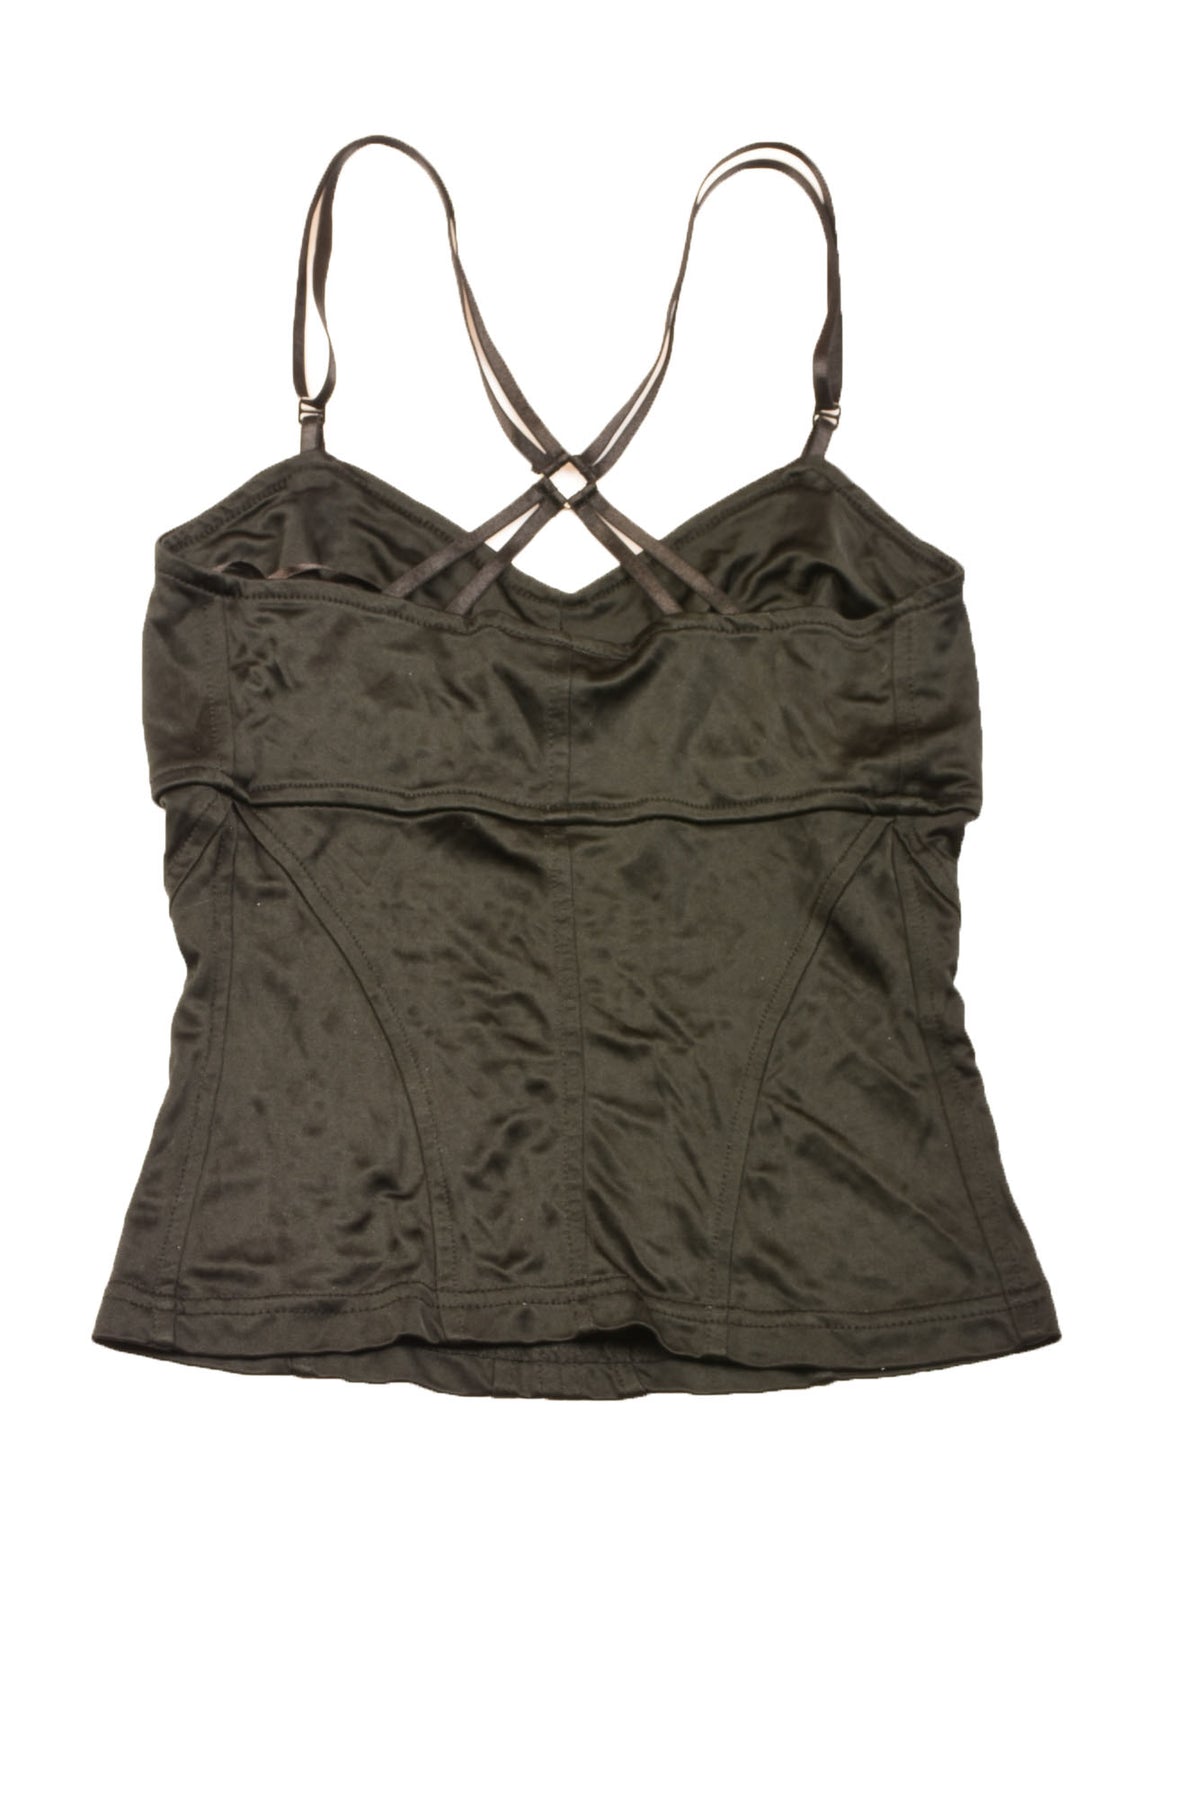 Express Size X-Small Women&#39;s Top